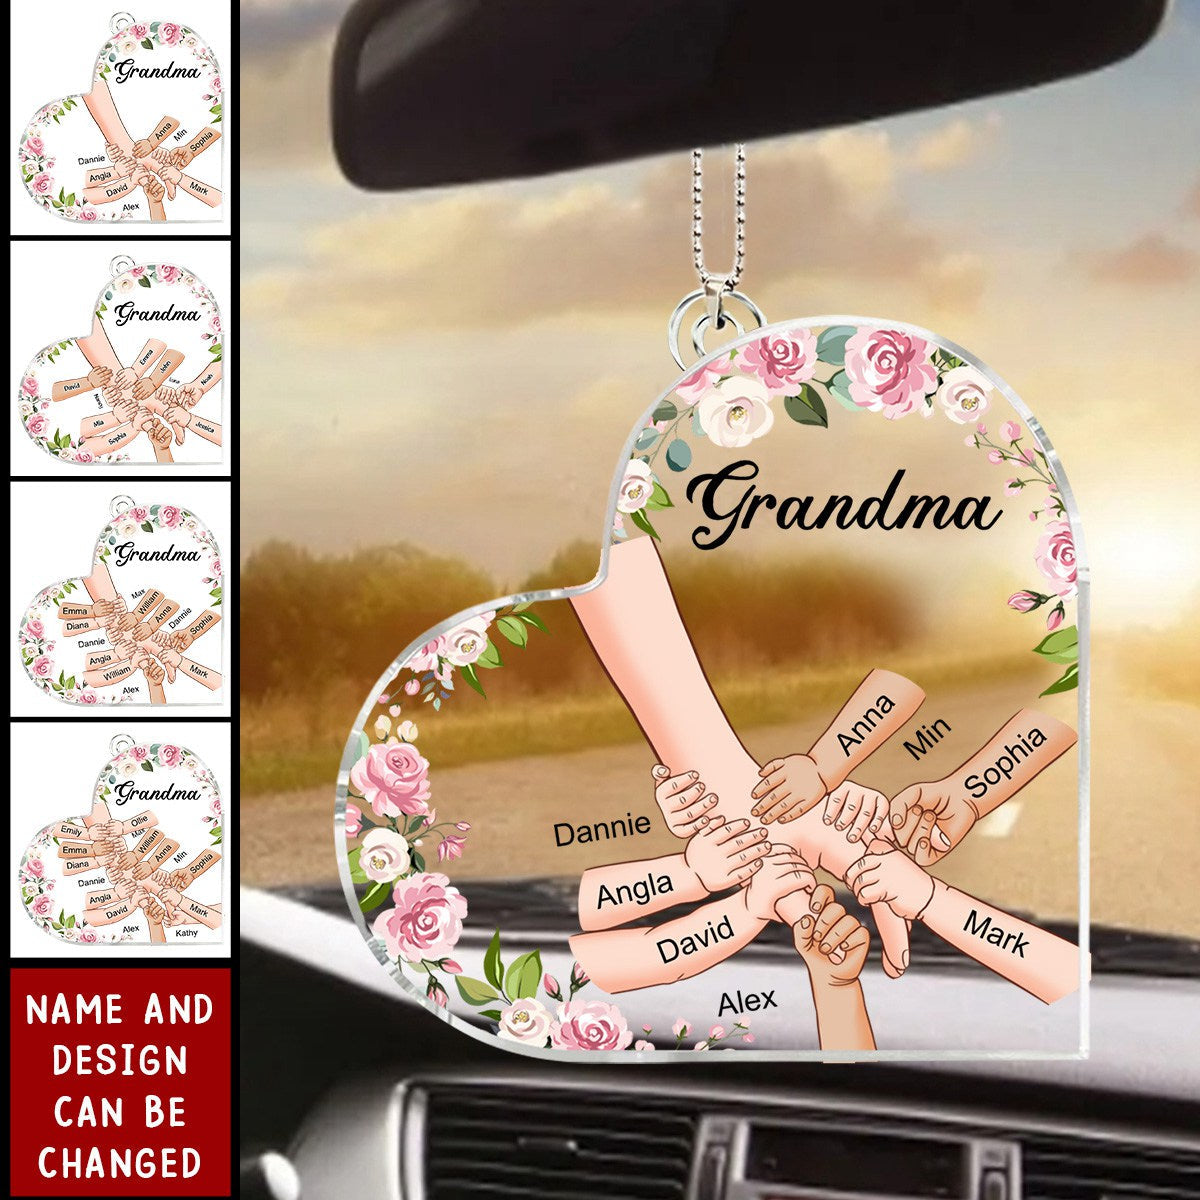 Grandma Holding Hand With Grandkids Names - Personalized Car Ornament